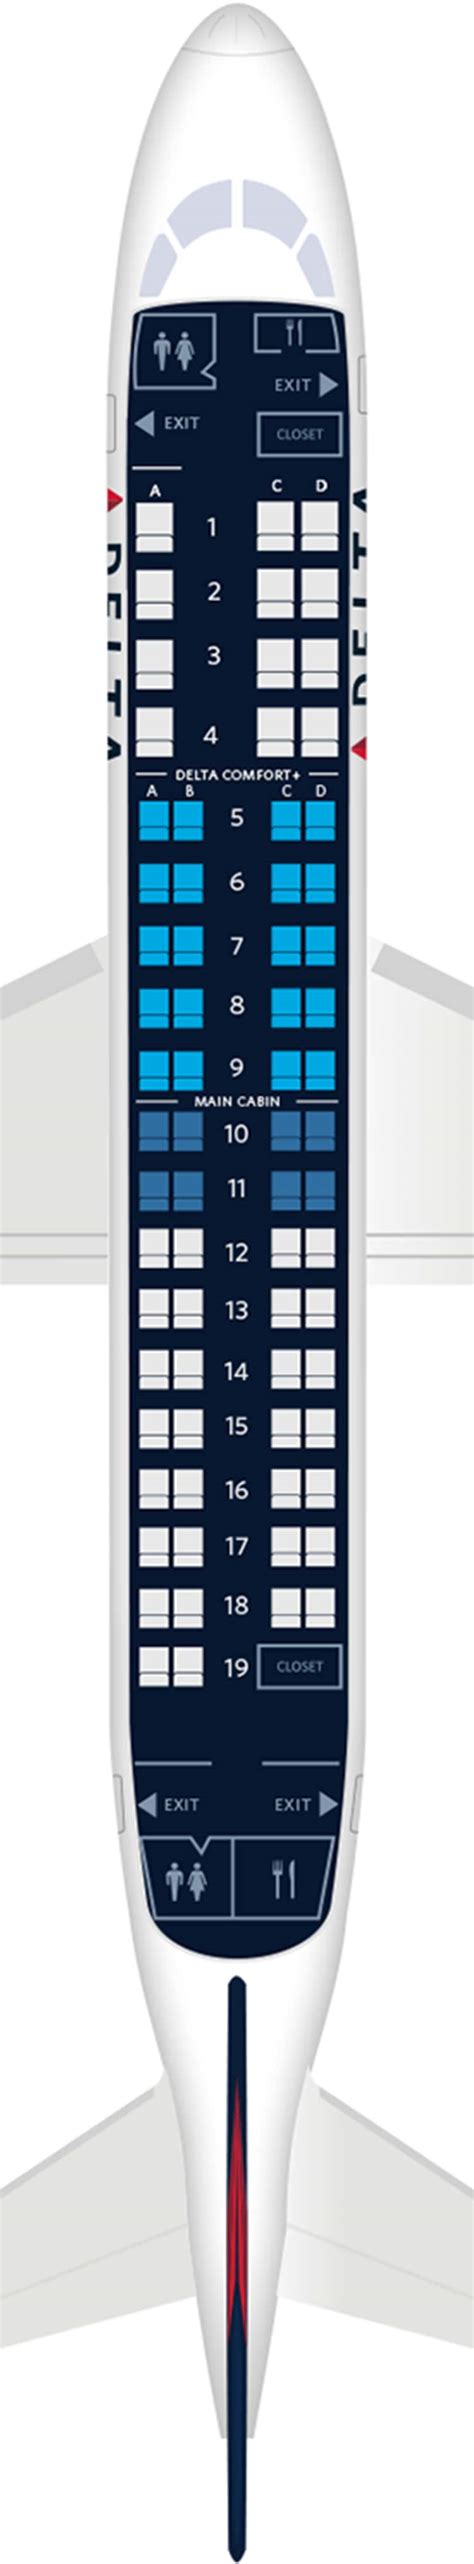 Embraer 175 seating map. About the Embraer 175. Embraer 175s are the smallest aircraft in our fleet and are also known as "Cityhoppers." The aircraft are mostly used for flights to destinations within Europe. Examples are Turin, Graz, and Stuttgart, depending on the season. The Embraers, unlike the other aircraft in our fleet, are not named. 